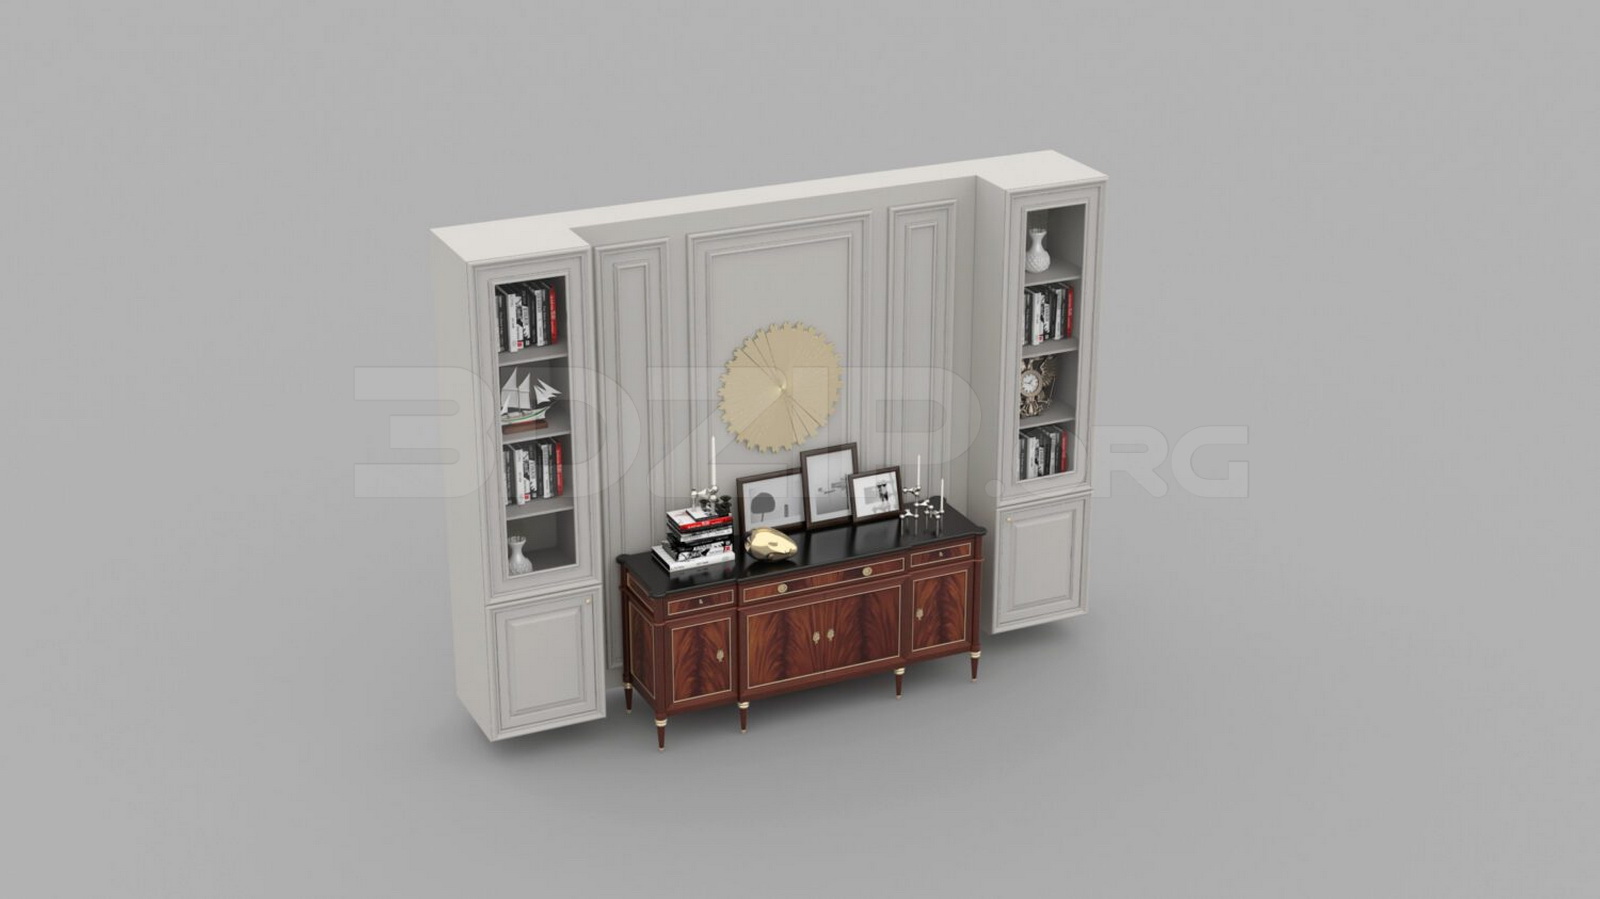 969. Download Free Display Cabinets Model By Dam Anh